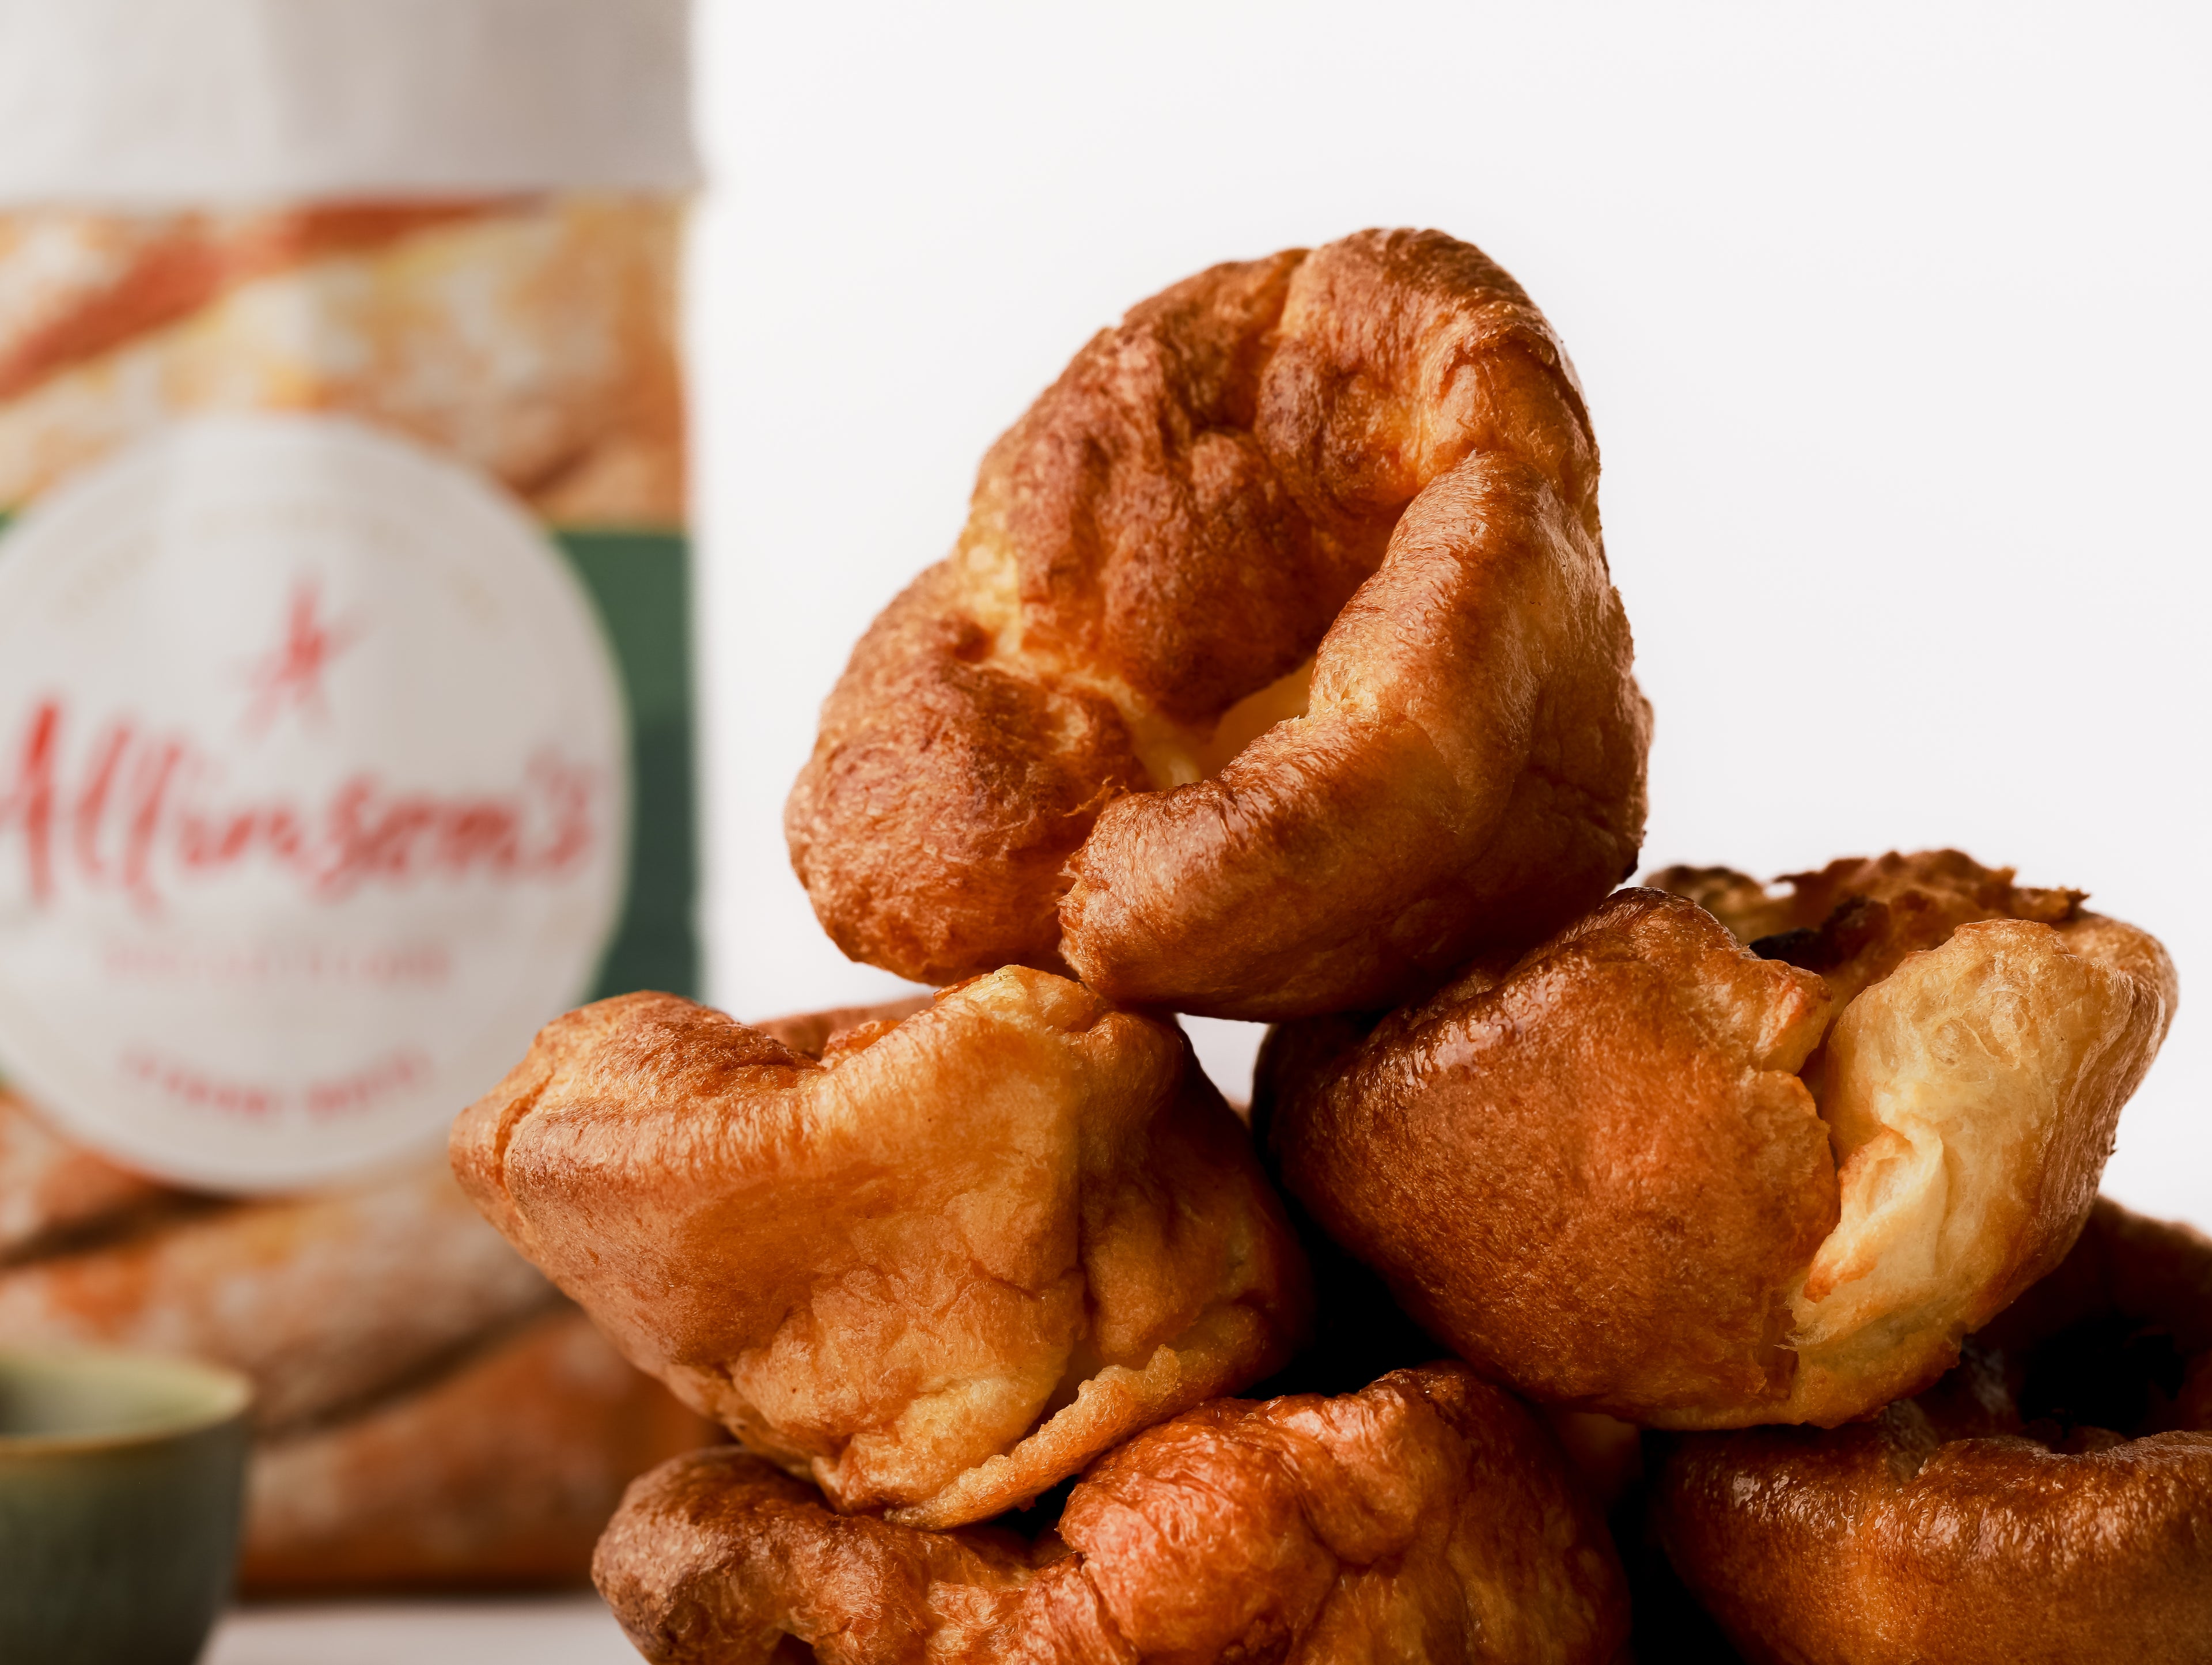 Stack of yorkshire puddings with a bag of flour in the background